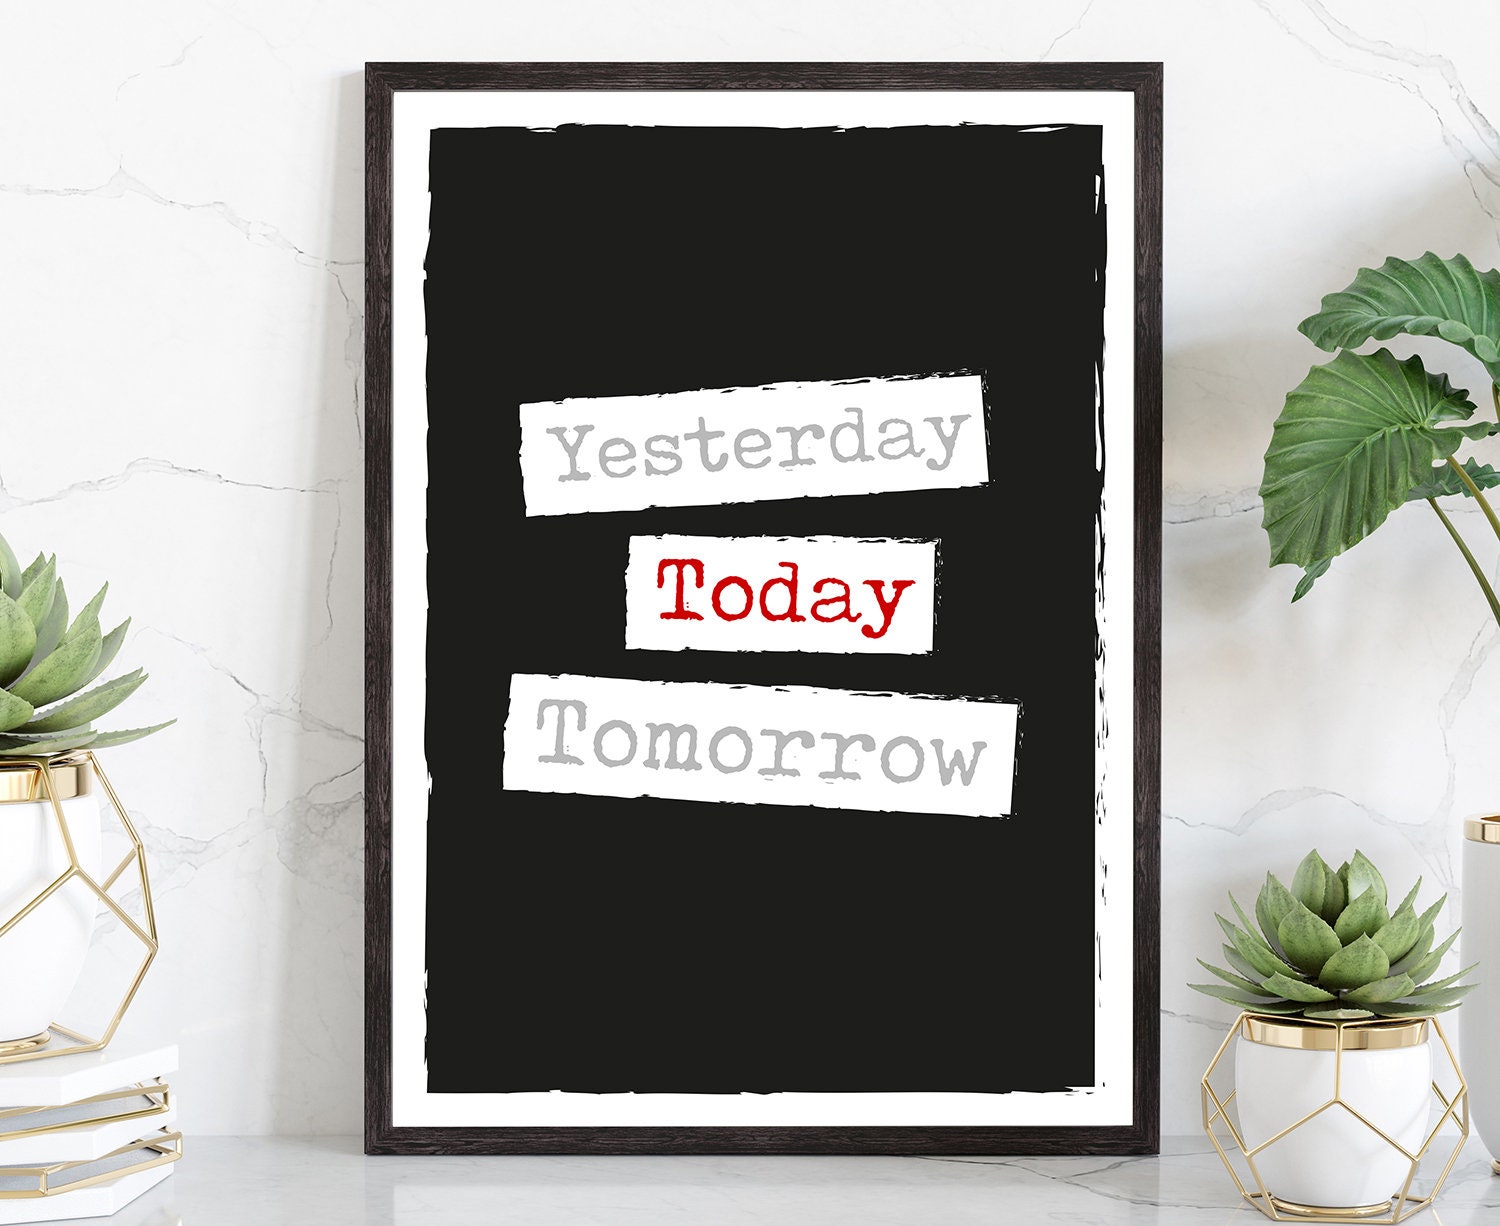 Yesterday Today Tomorrow, School wall decor, Office wall art, Kids room wall decor, Dorm room wall art, Inspirational quotes, Home wall art